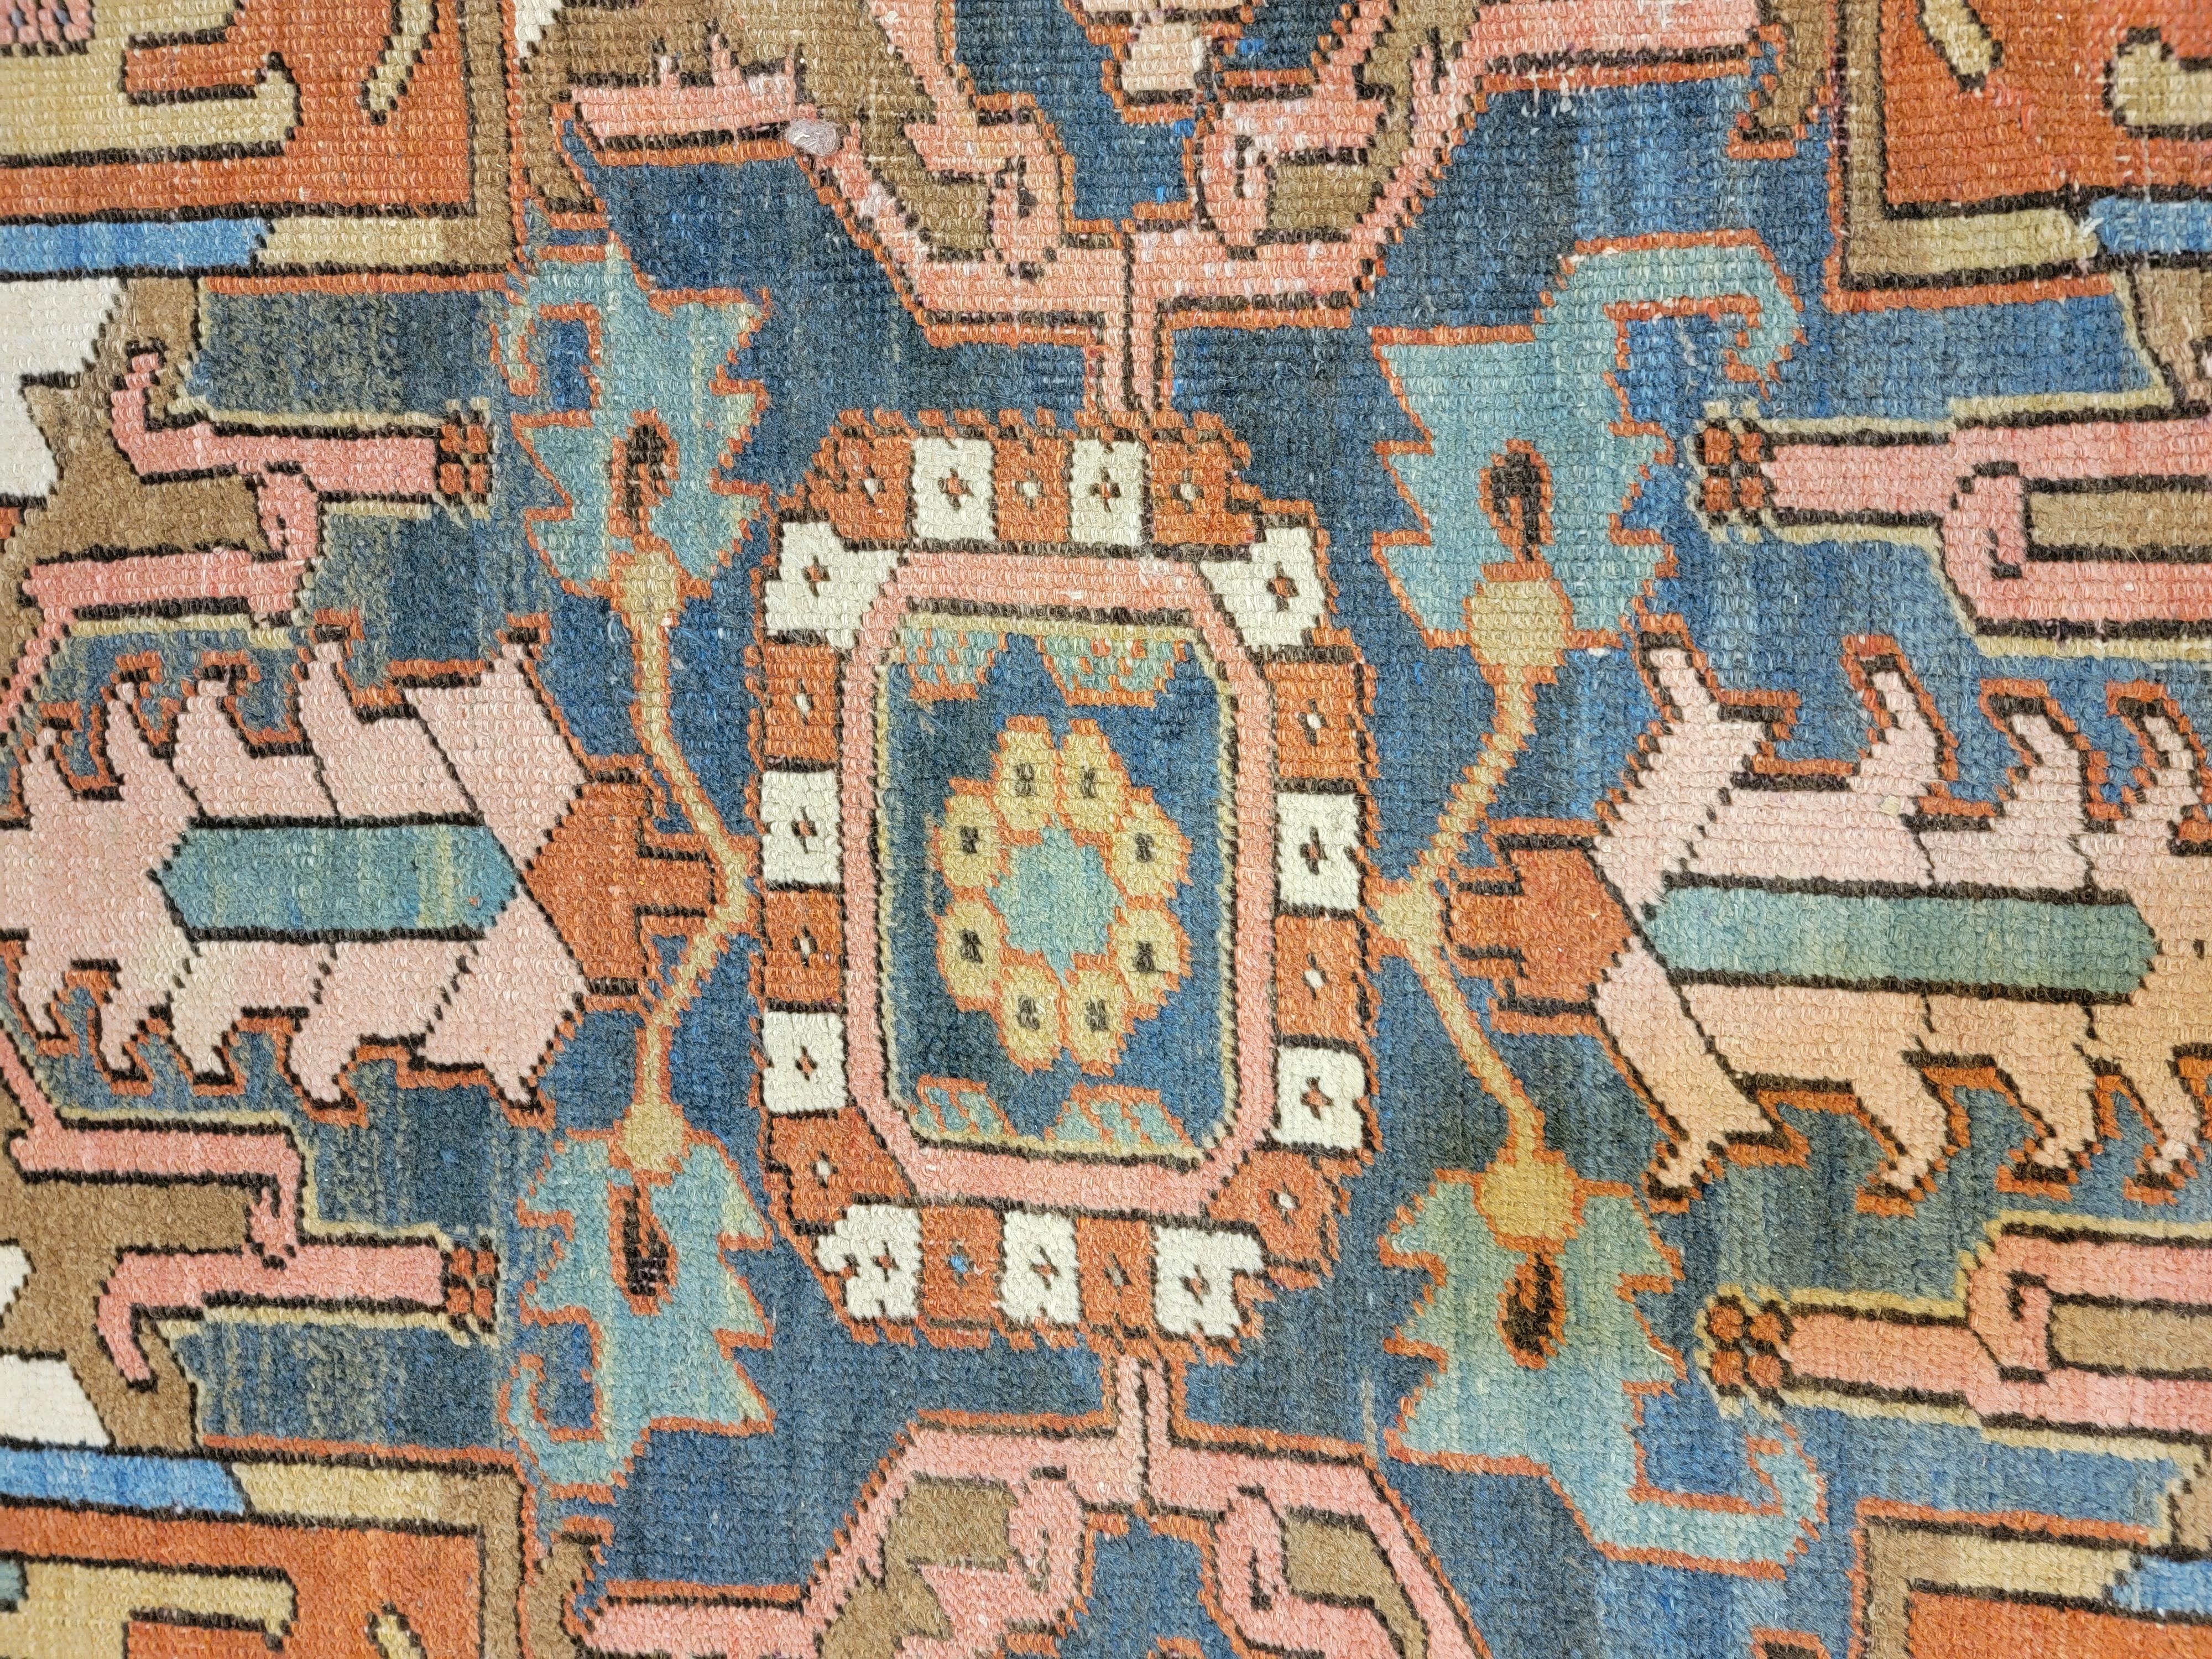 Absolutely Unique and rare 100 year Persian Serapi Rug with an Ivory background. Original Serapi design.
Age apparent patina, well distributed different color percentages of the whole, no dominant color.

Size: 9'8